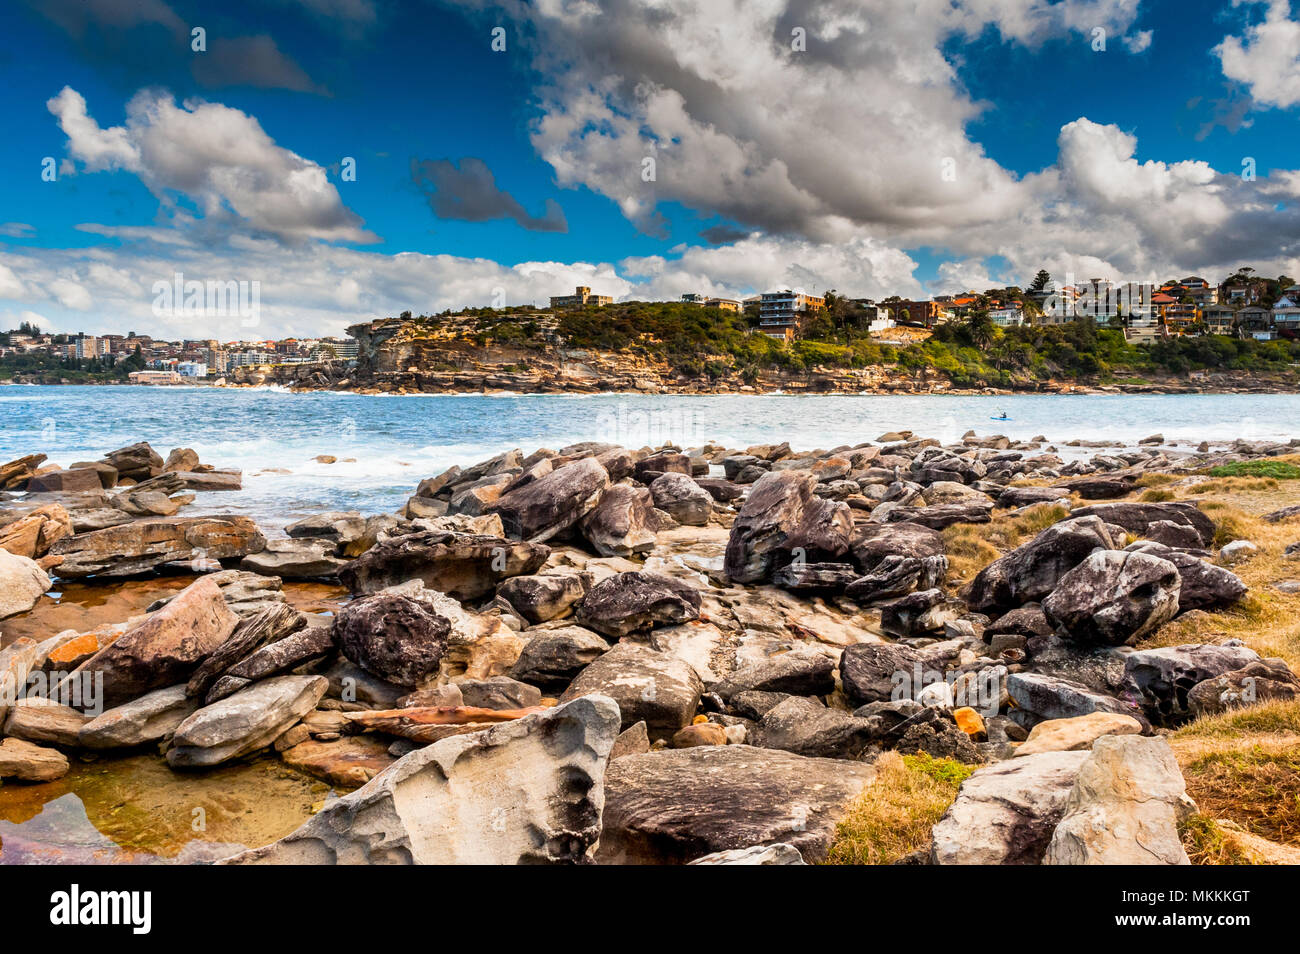 A single canoe makes its way across a bay between Bondi Beach and Coogee beach near a rocky shore line on a  beautiful day in Sydney Australia. Stock Photo